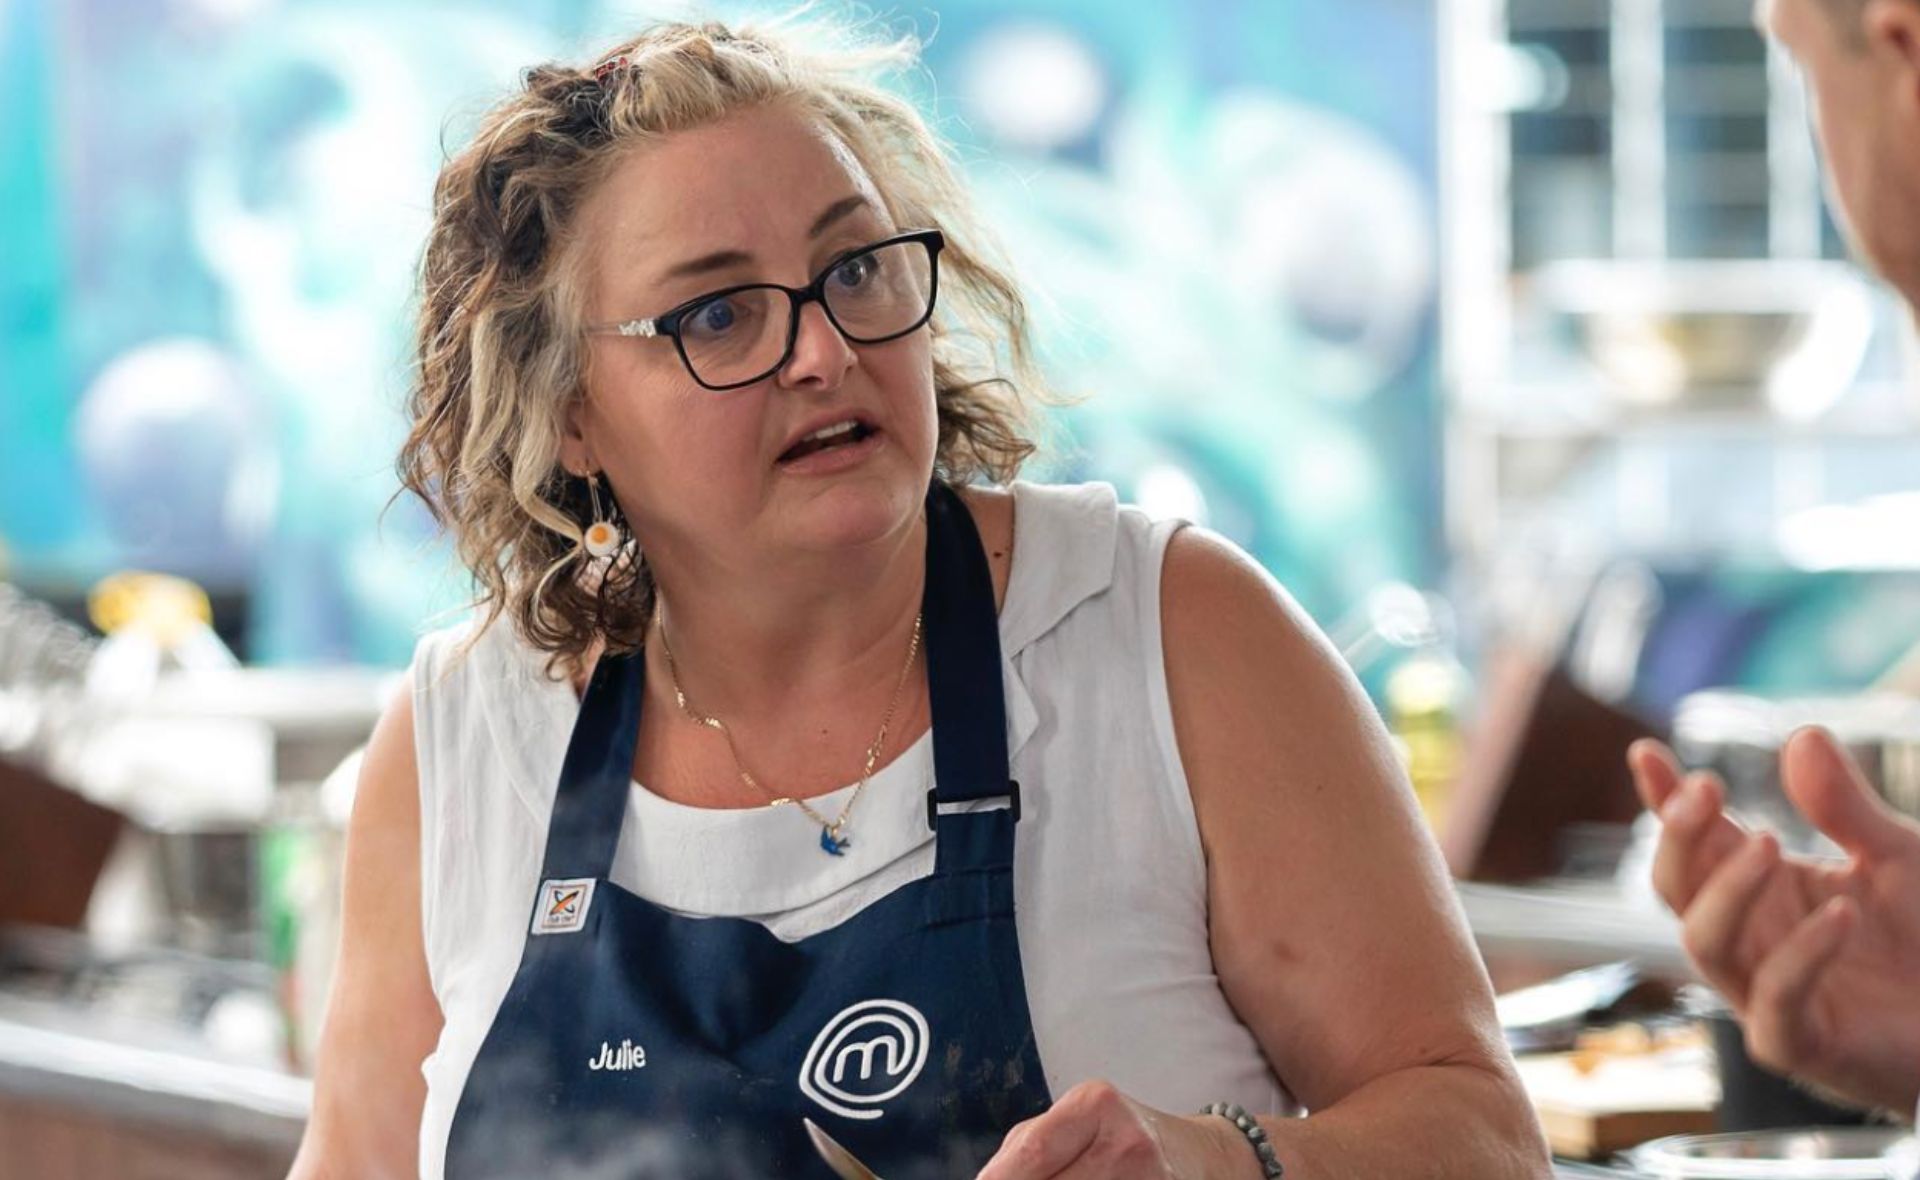 EXCLUSIVE: MasterChef’s Julie Goodwin reveals the “hardest days are behind” her now she’s back at the top